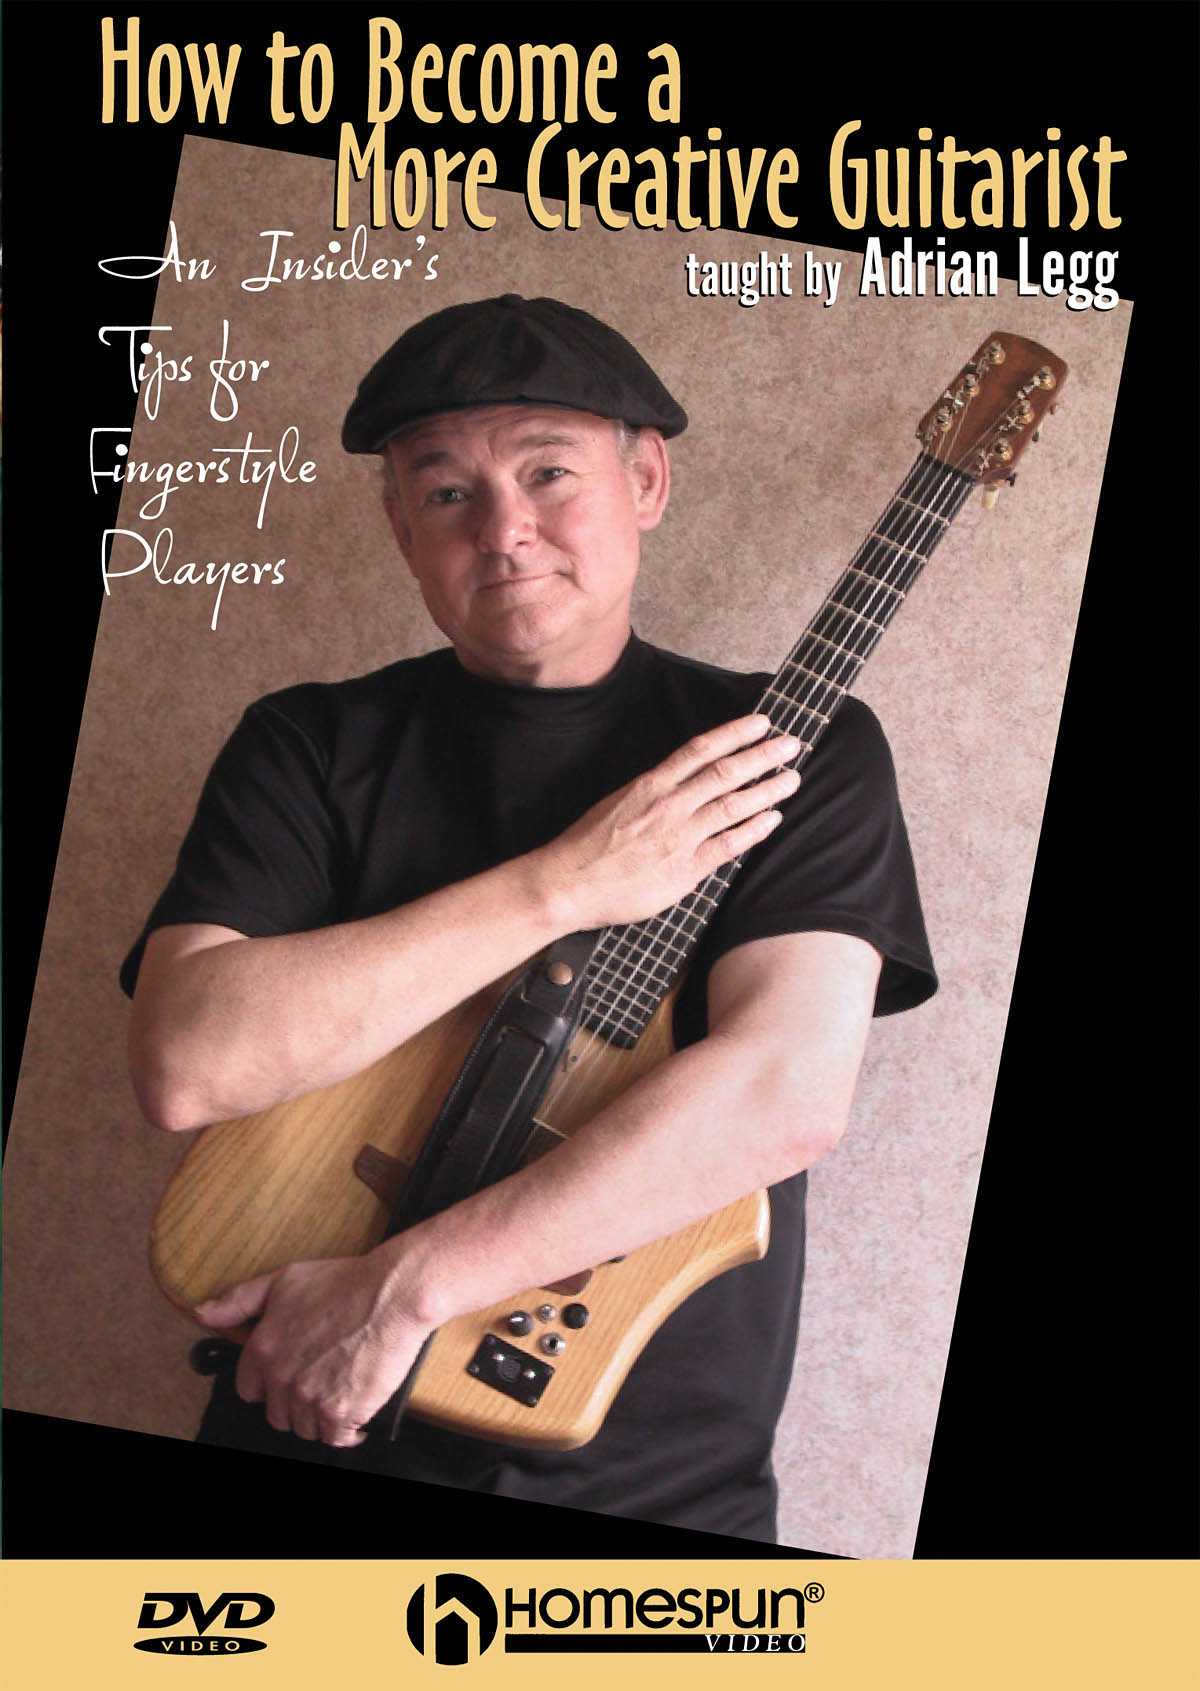 Image 1 of DVD - How to Become a More Creative Guitarist - SKU# 300-DVD263 : Product Type Media : Elderly Instruments